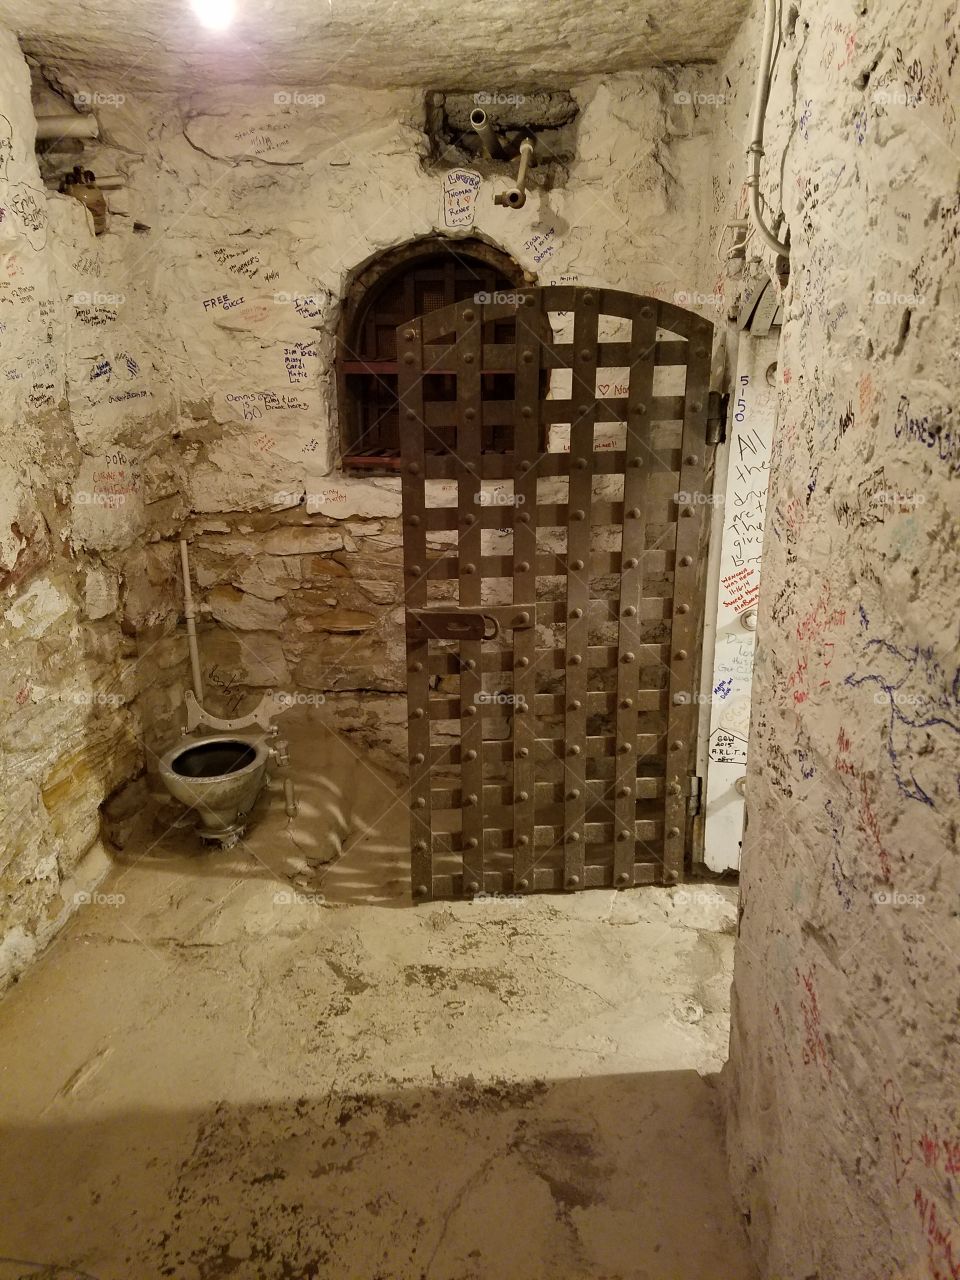 1800's Jail - Solitary Confinement